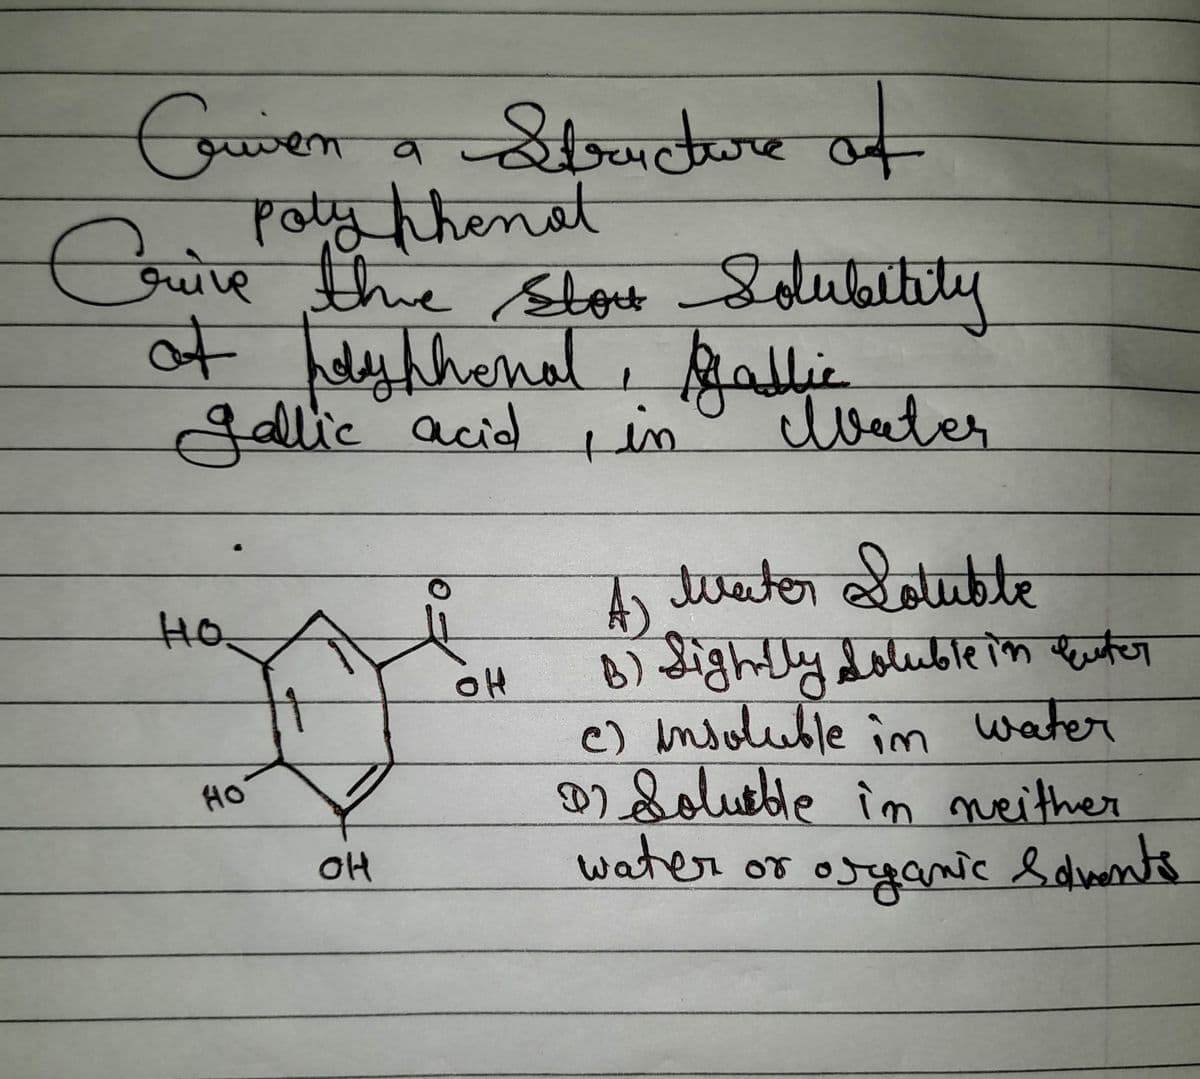 Criven a Structure of
em
Poty thenat
Crive the stort Solubility
of polyphenal, Gallie
Jallic acid, in
но
HO
OH
OH
Water
A) Water Soluble
B) Sightly, doluble in Euter
c) insoluble in water
22 Soluble in weither
water or organic Solvents